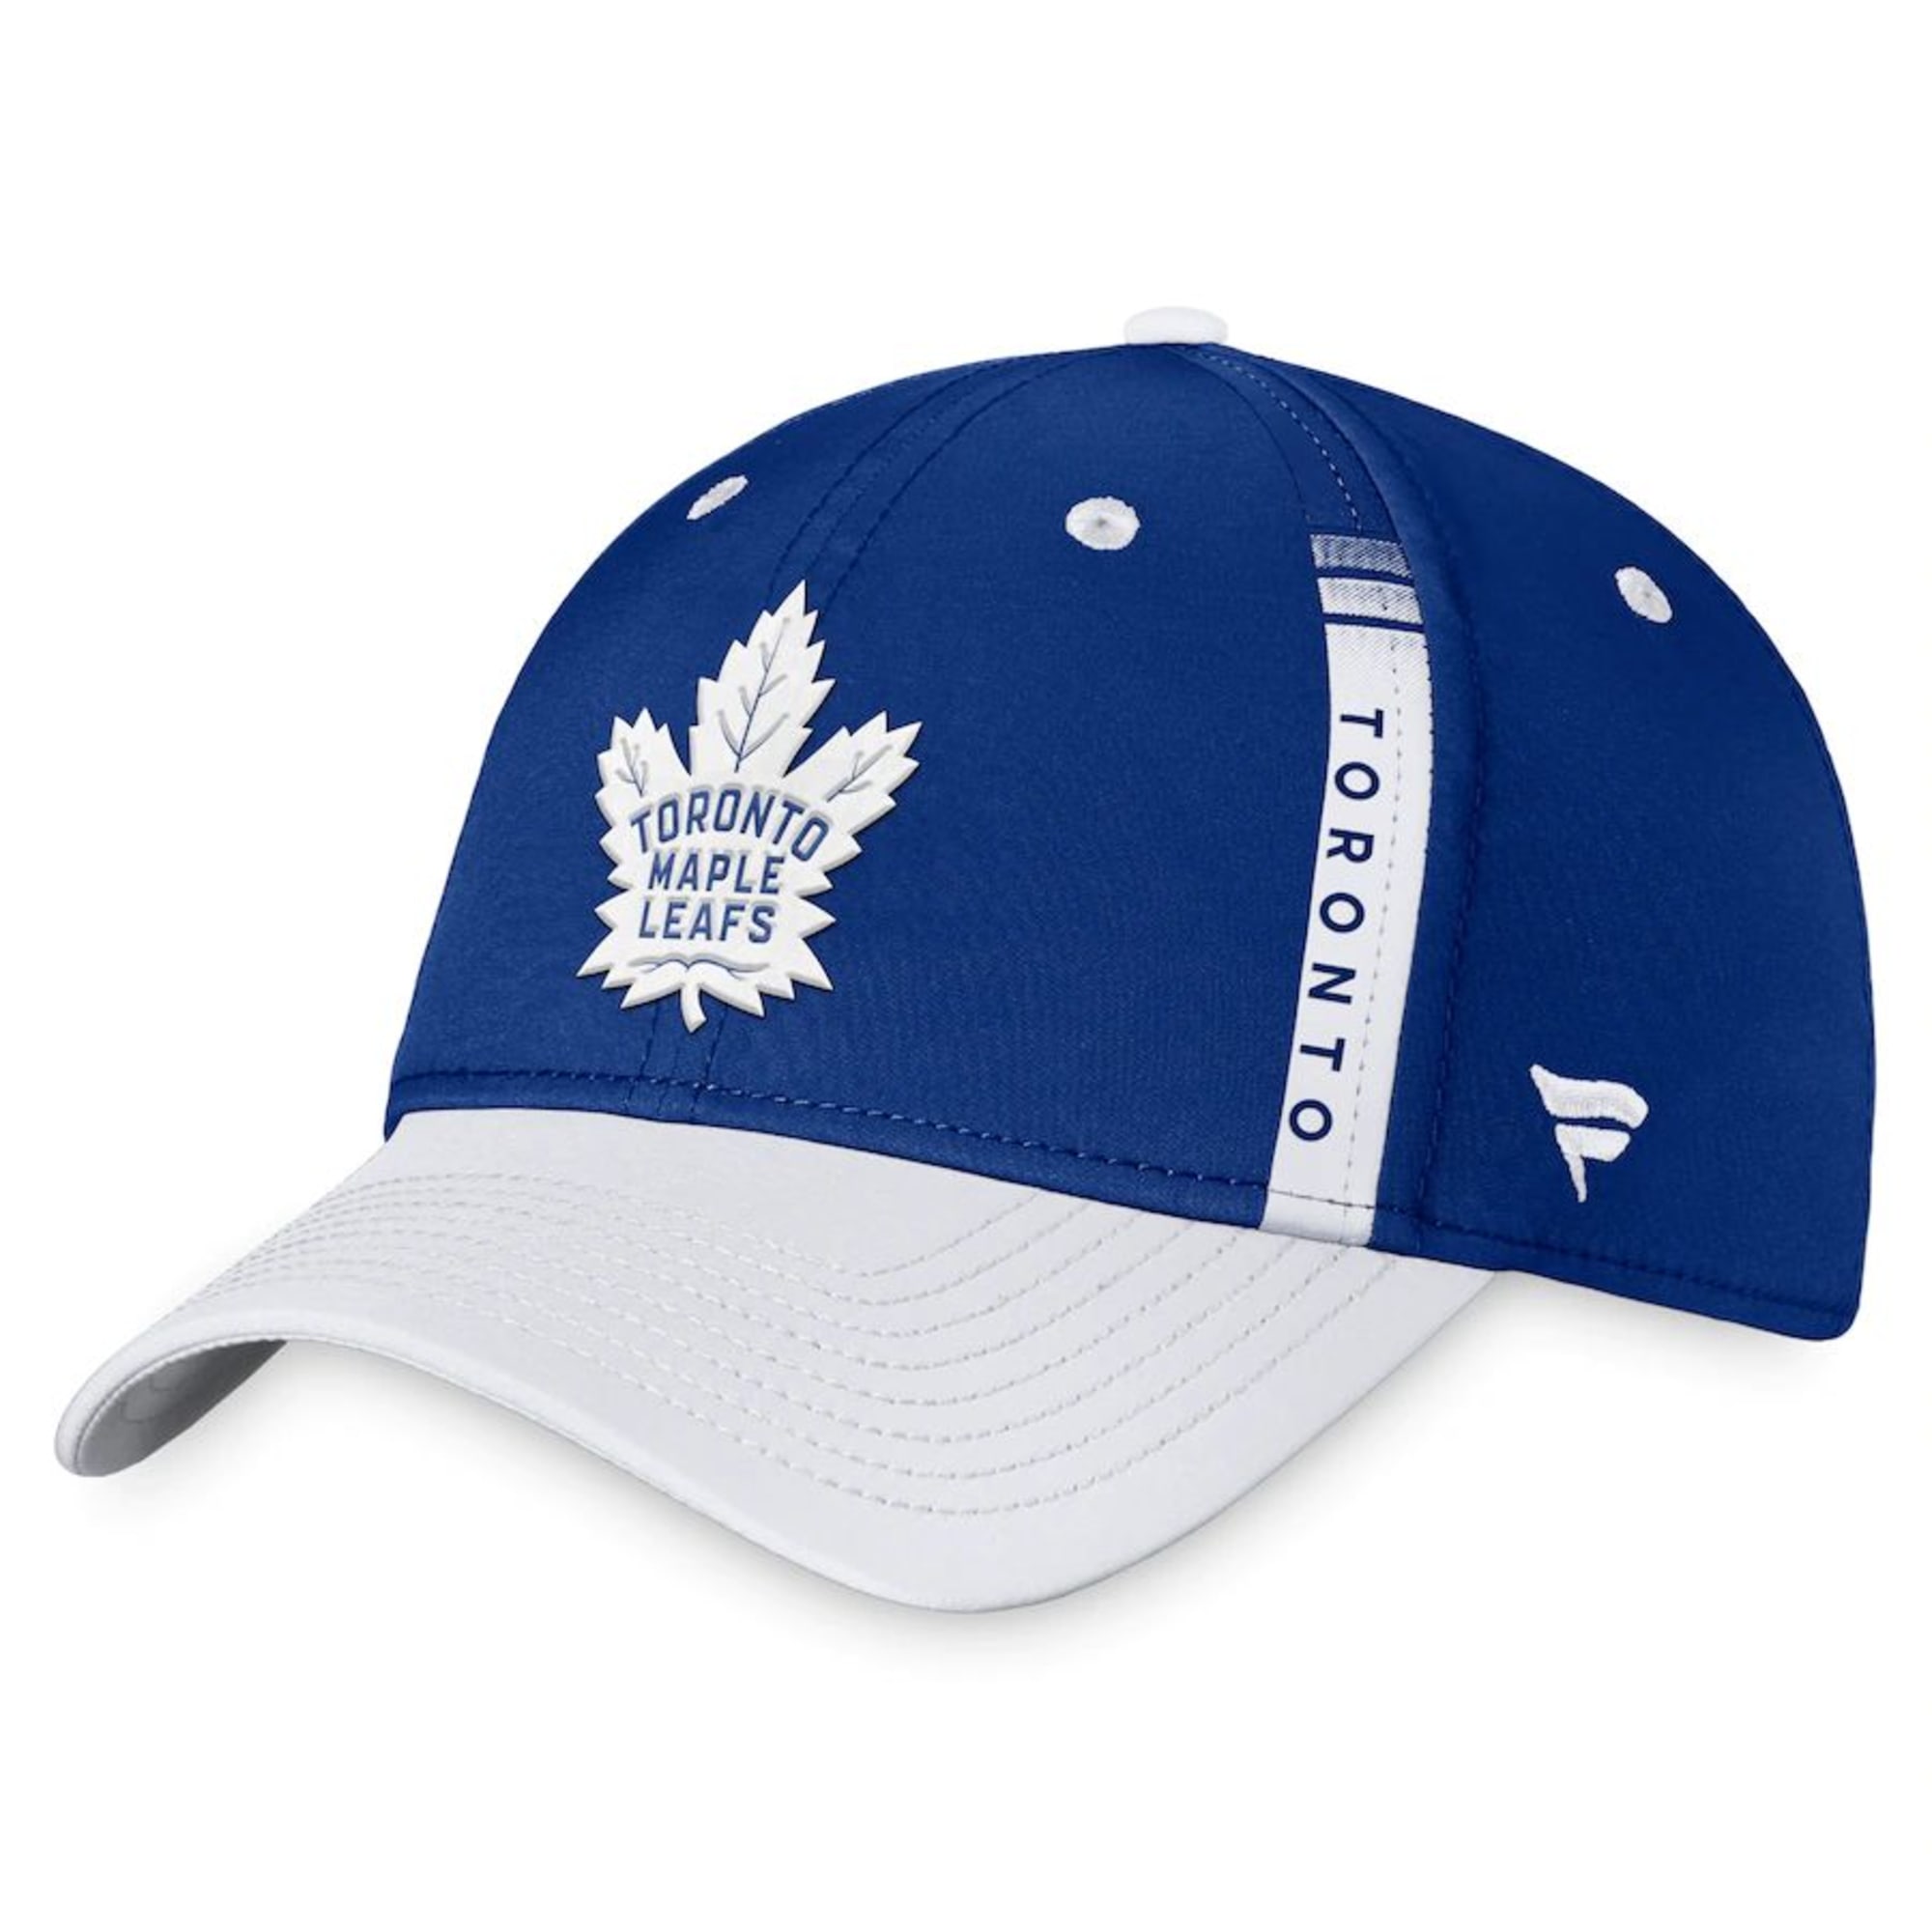 Get your 2022 Toronto Maple Leafs NHL Draft hats today